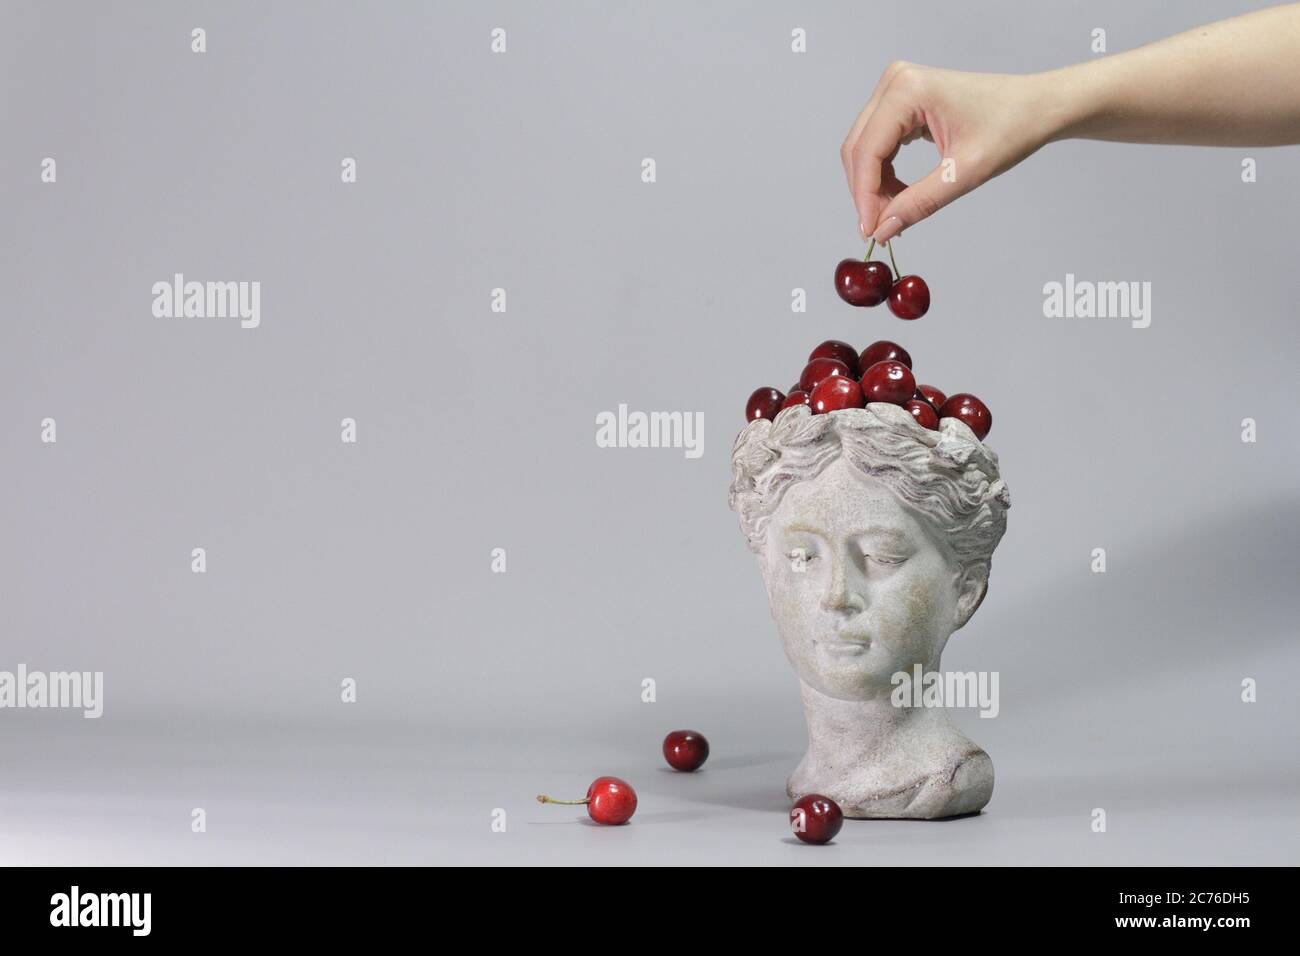 Stylish decoration made in shape of Greek goddess head full of red ripe cherries. Beautiful design elements. Gray background. Stock Photo